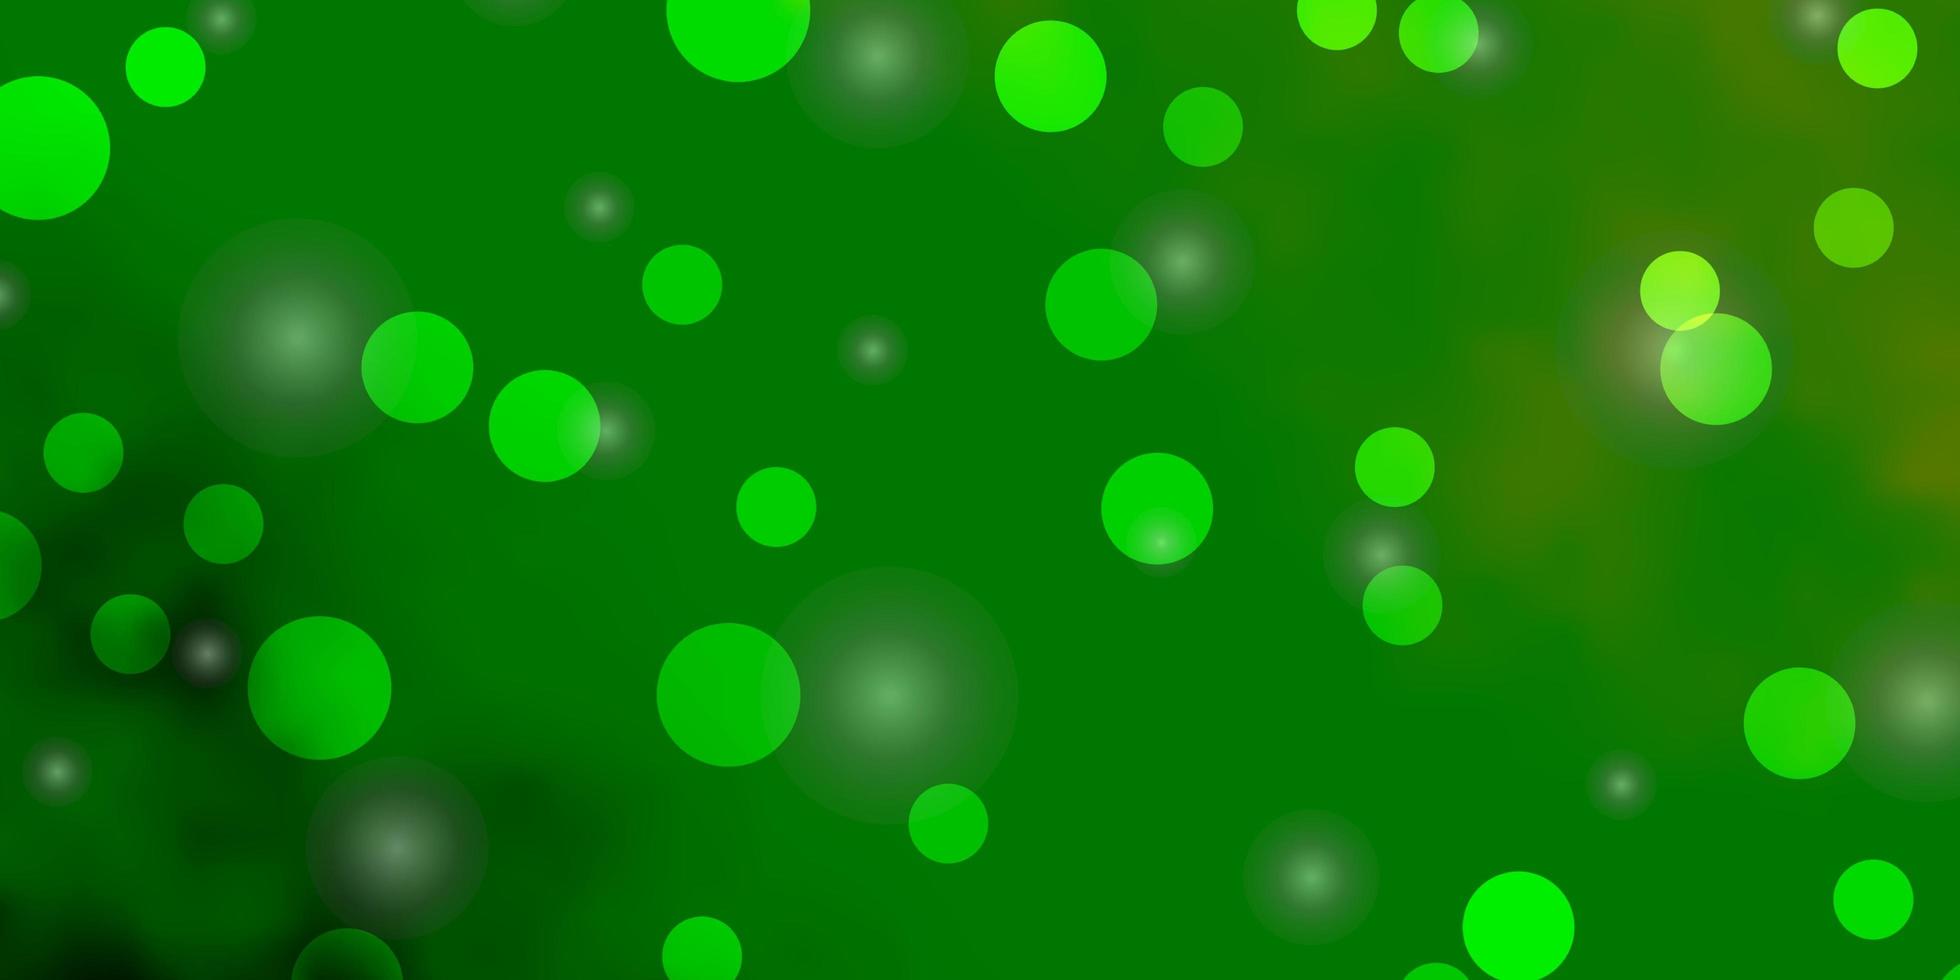 Light Green, Yellow vector layout with circles, stars.